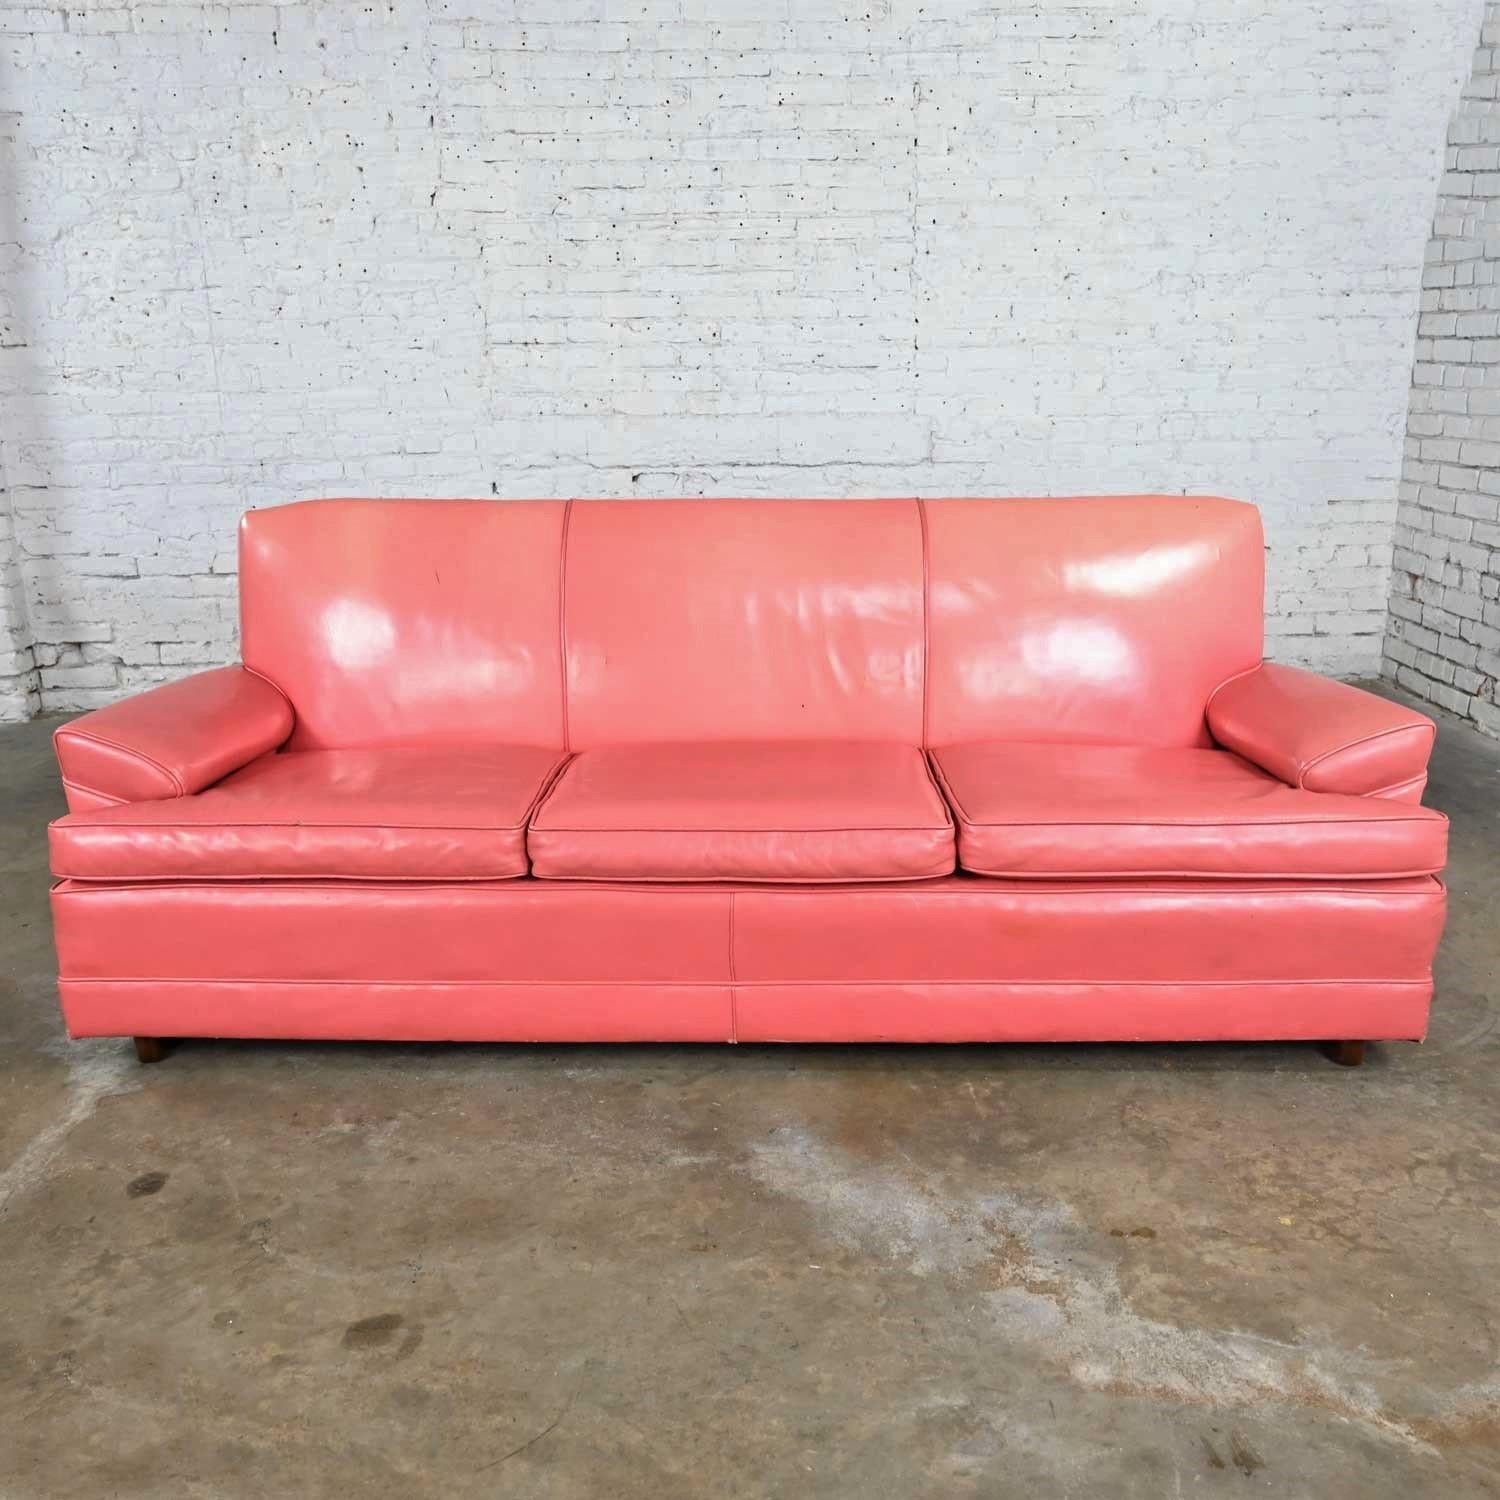 Vintage Hollywood Regency Art Deco Sofa with Original Pink Distressed Leather In Fair Condition In Topeka, KS